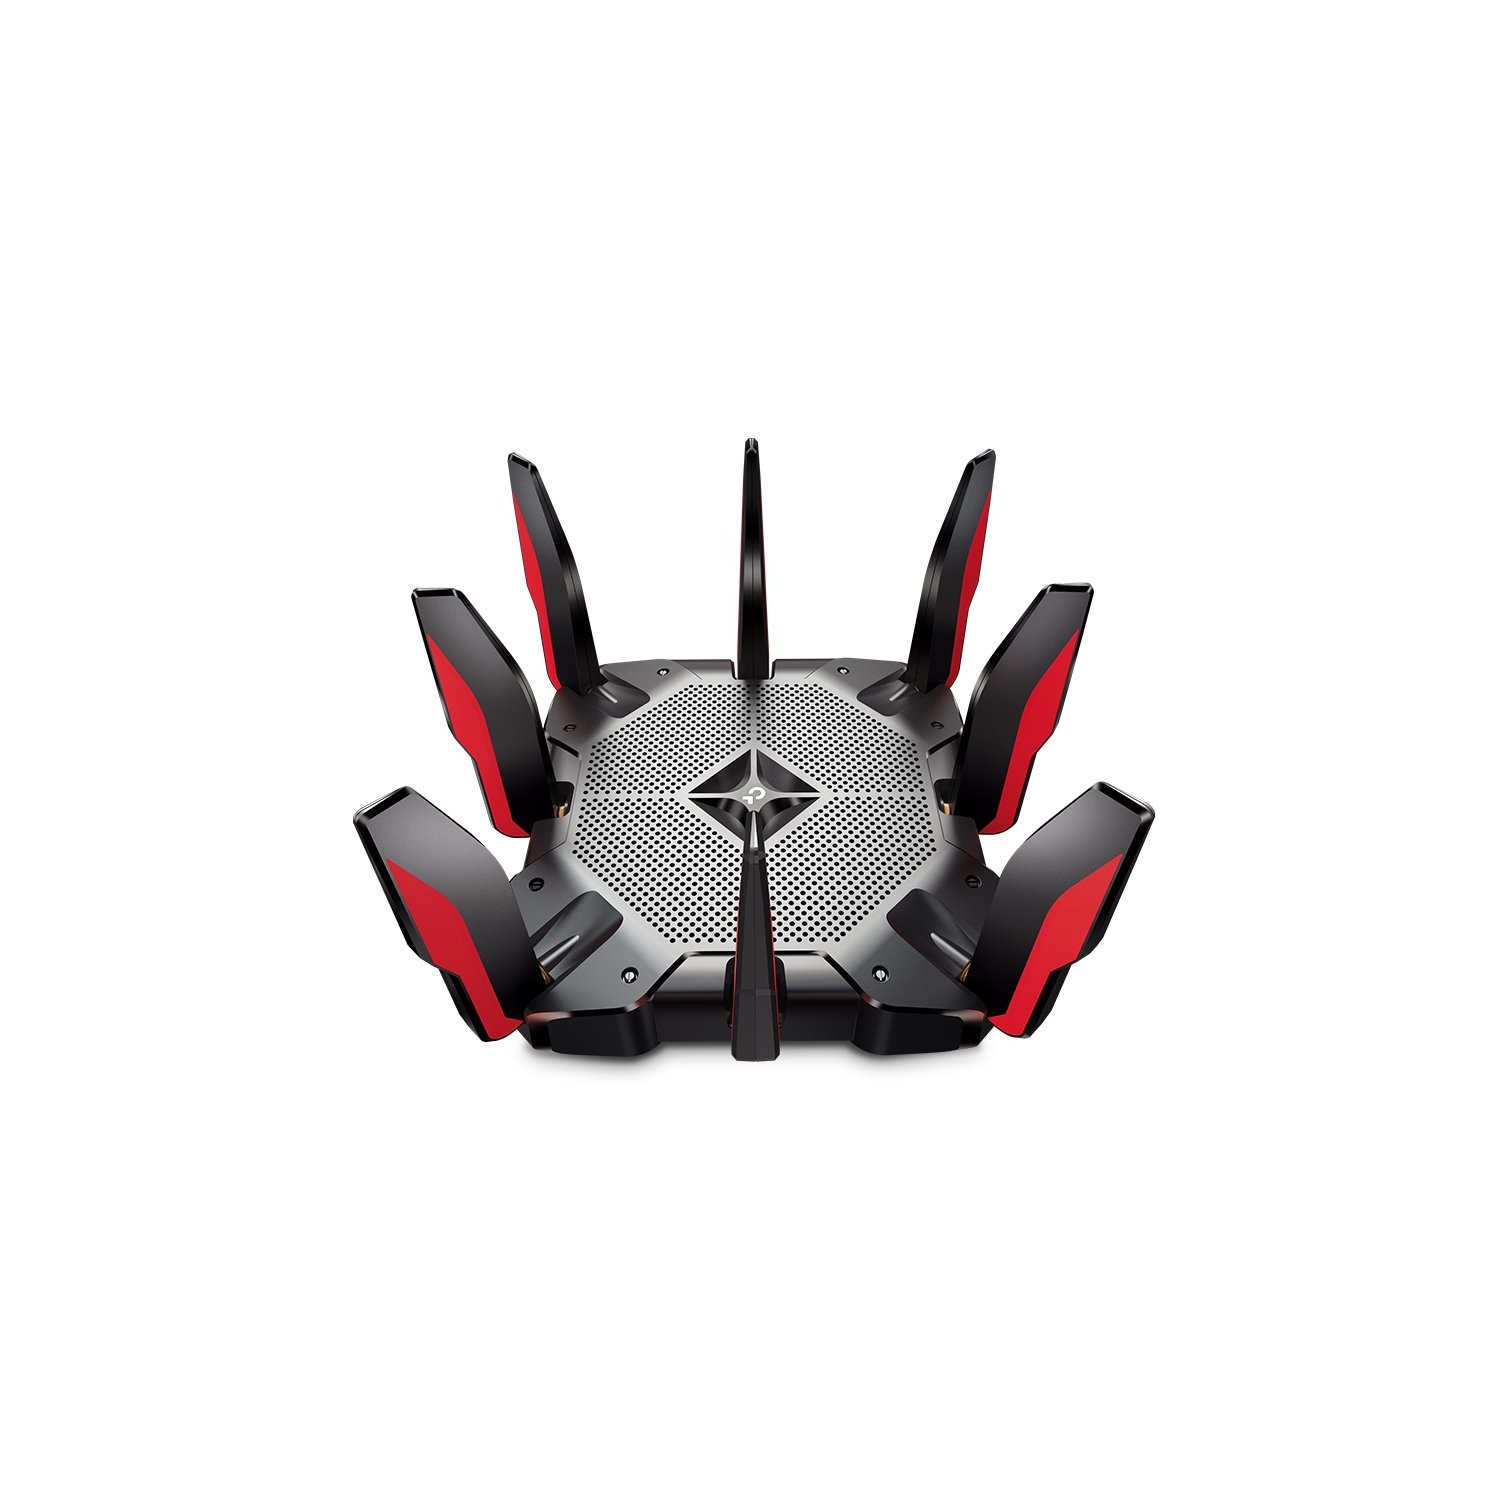 AX11000 Next-Gen Tri-Band Gaming Router | Best Buy Canada